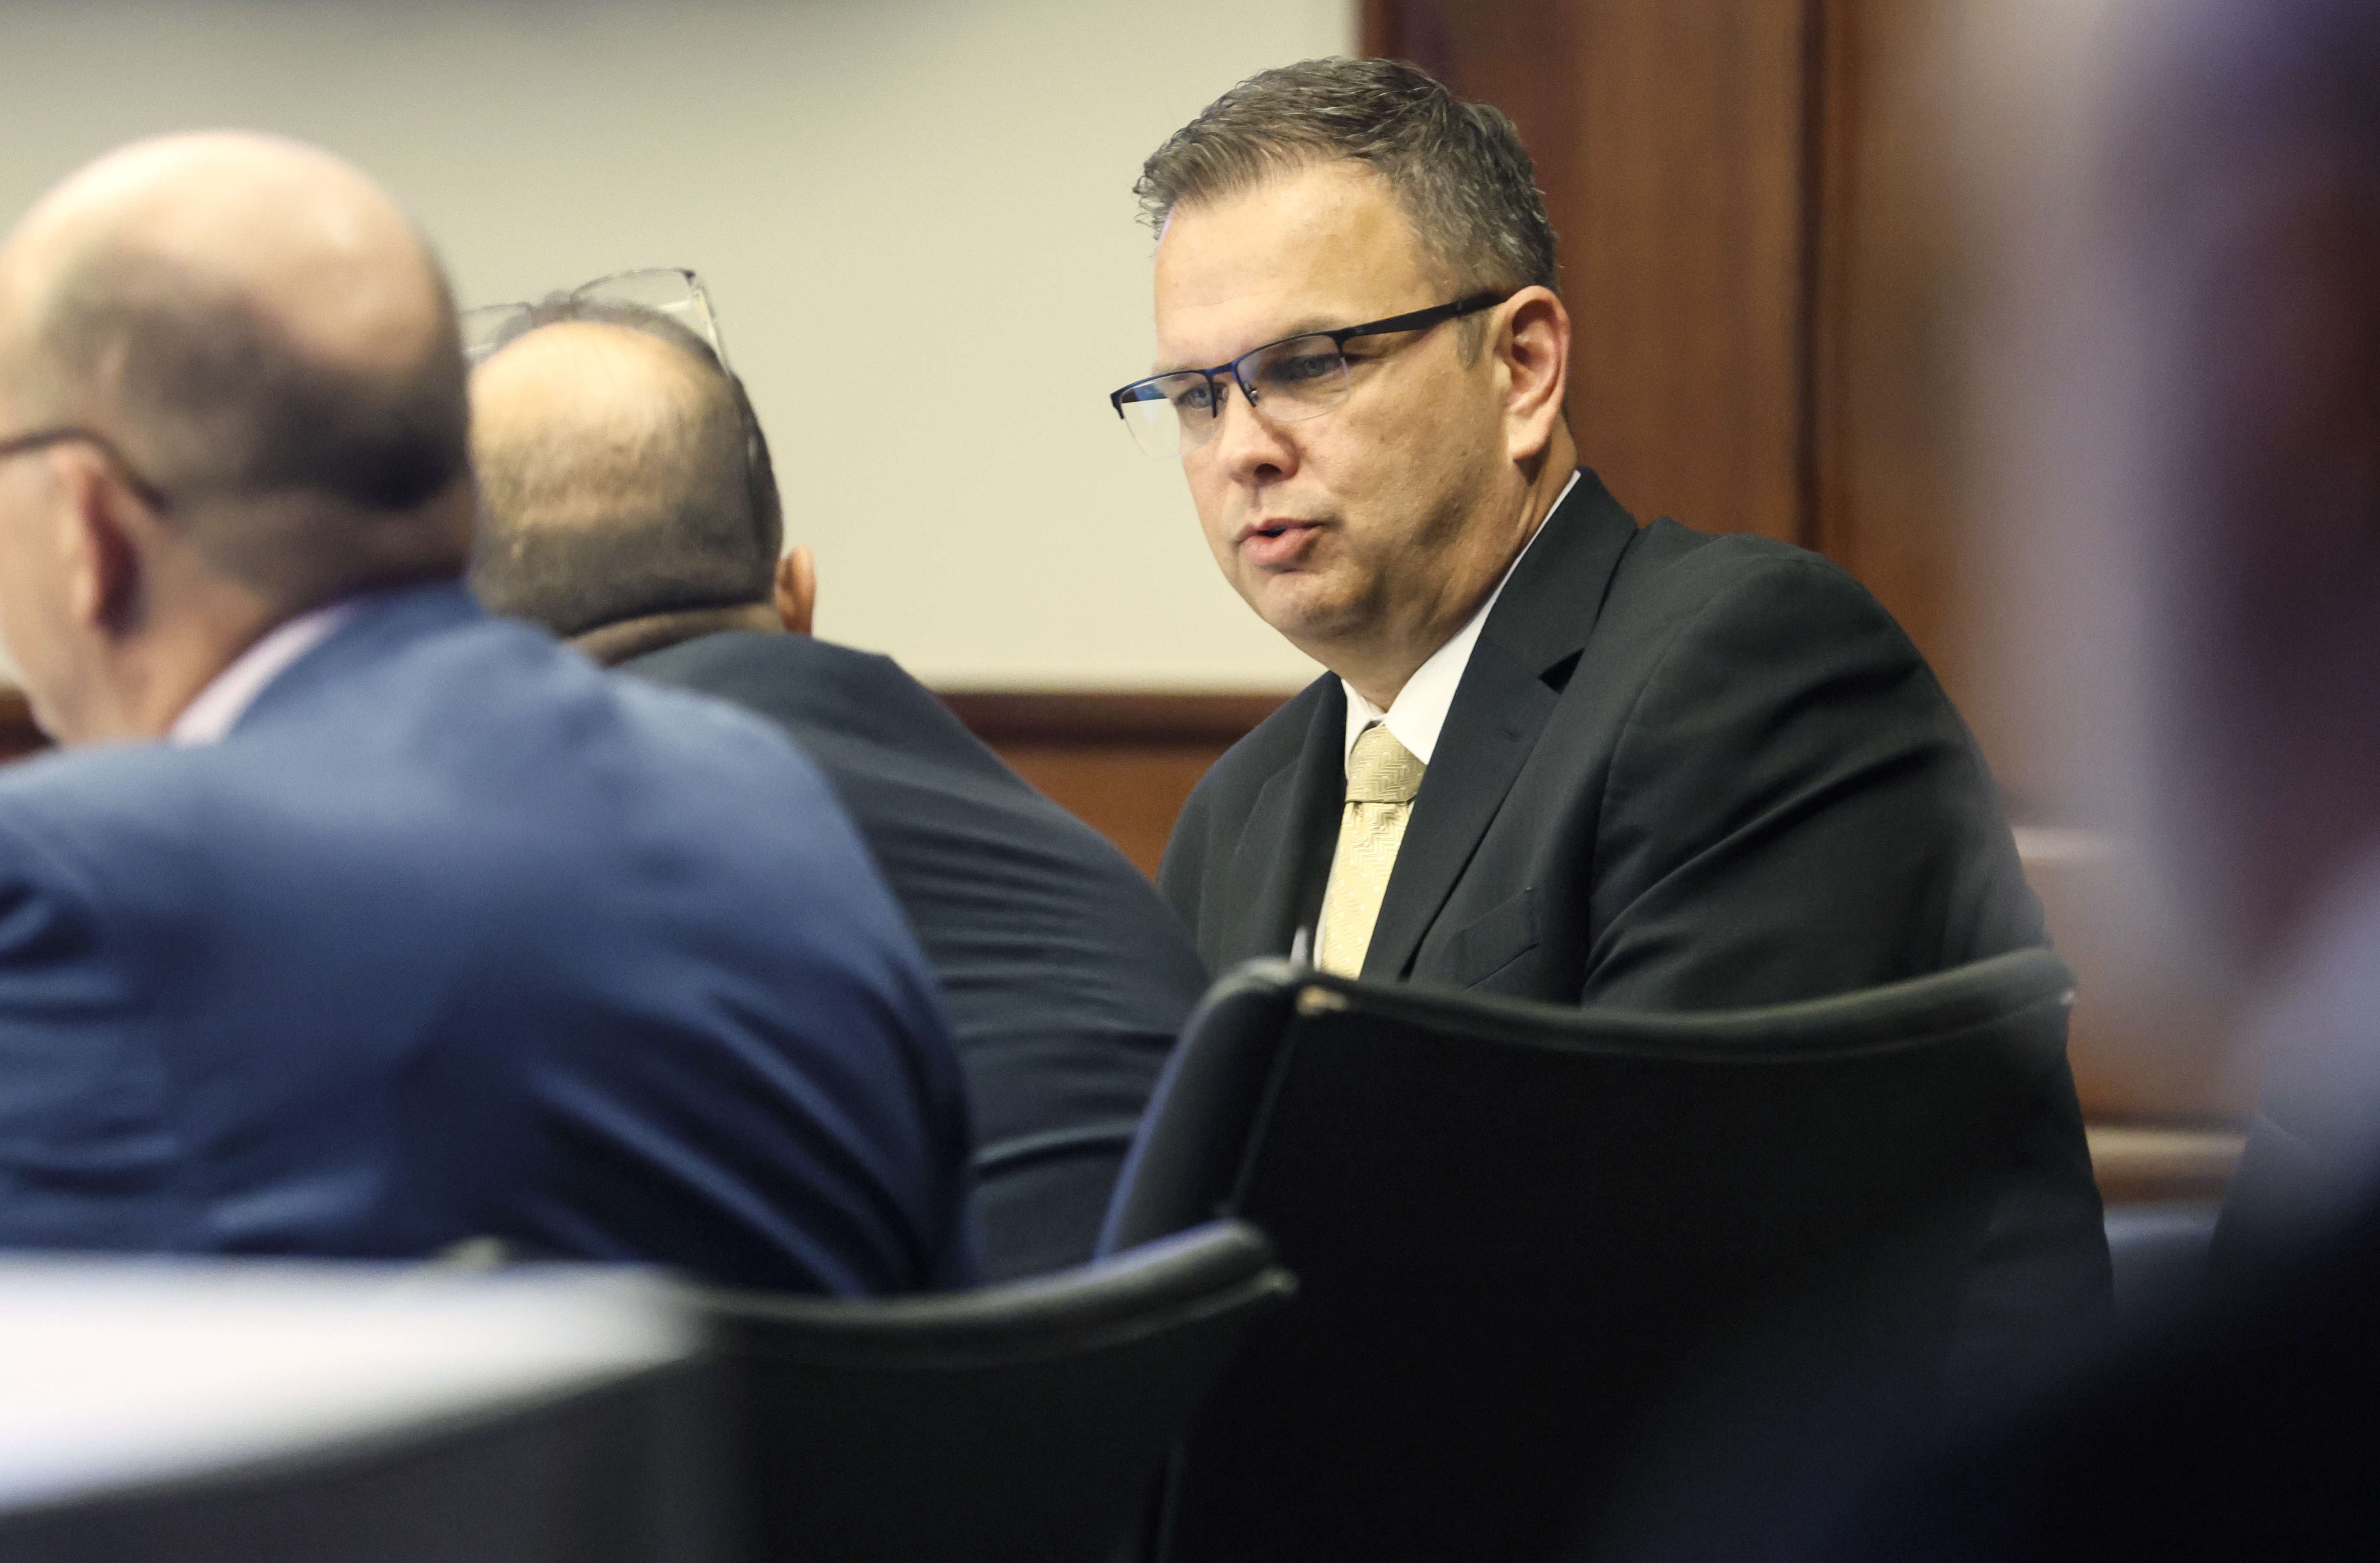 State Court of Appeals Judge Christian Coomer faces historic ethics trial